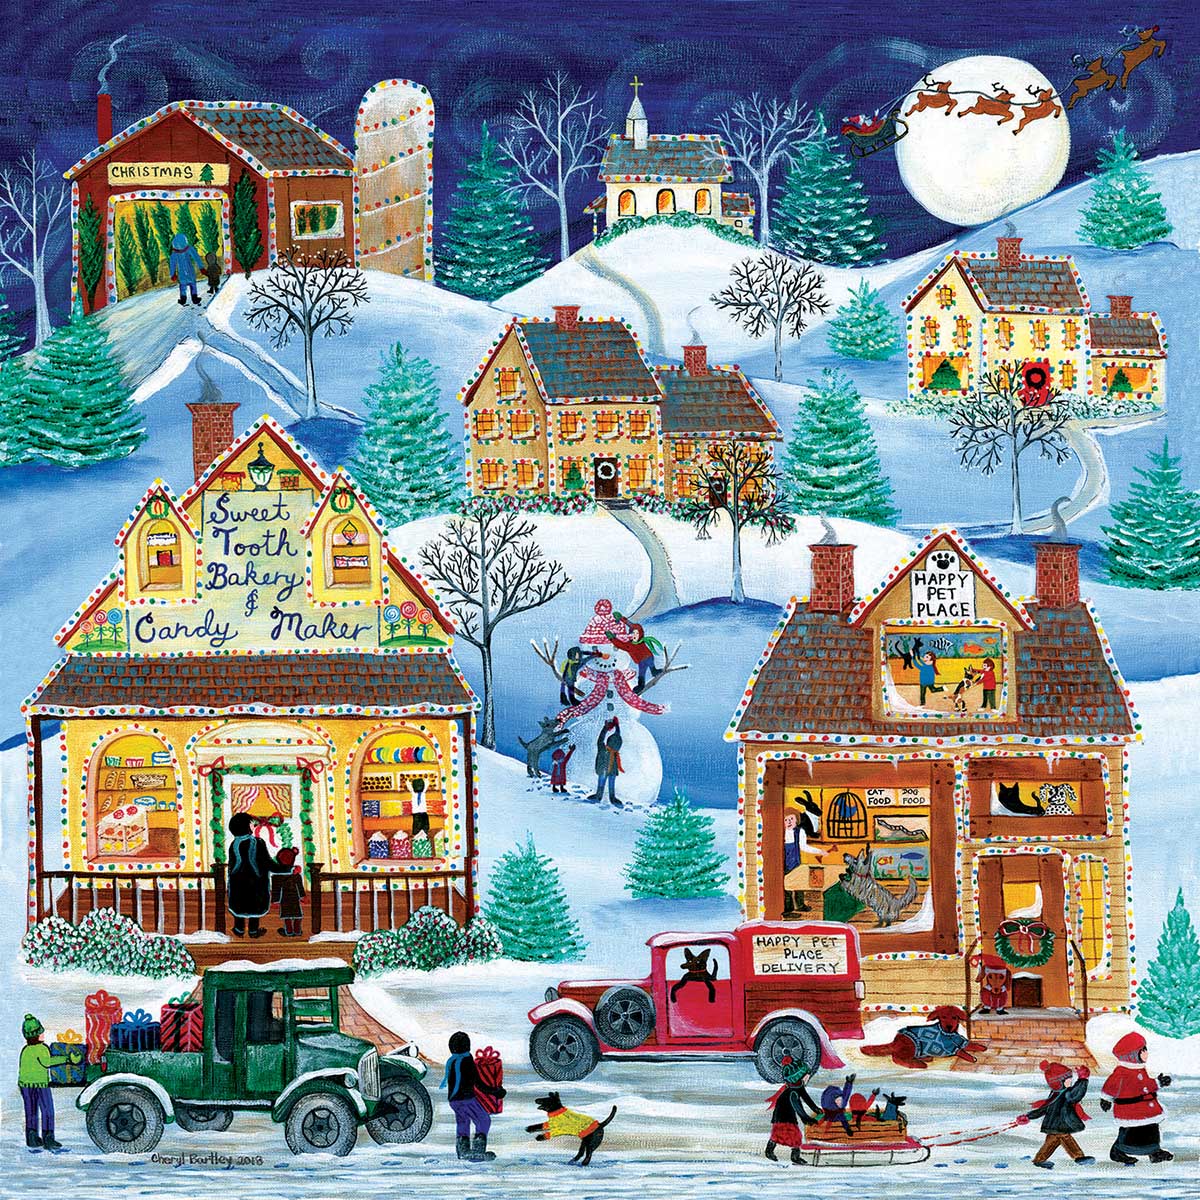 Sweet Tooth Bakery Christmas Jigsaw Puzzle